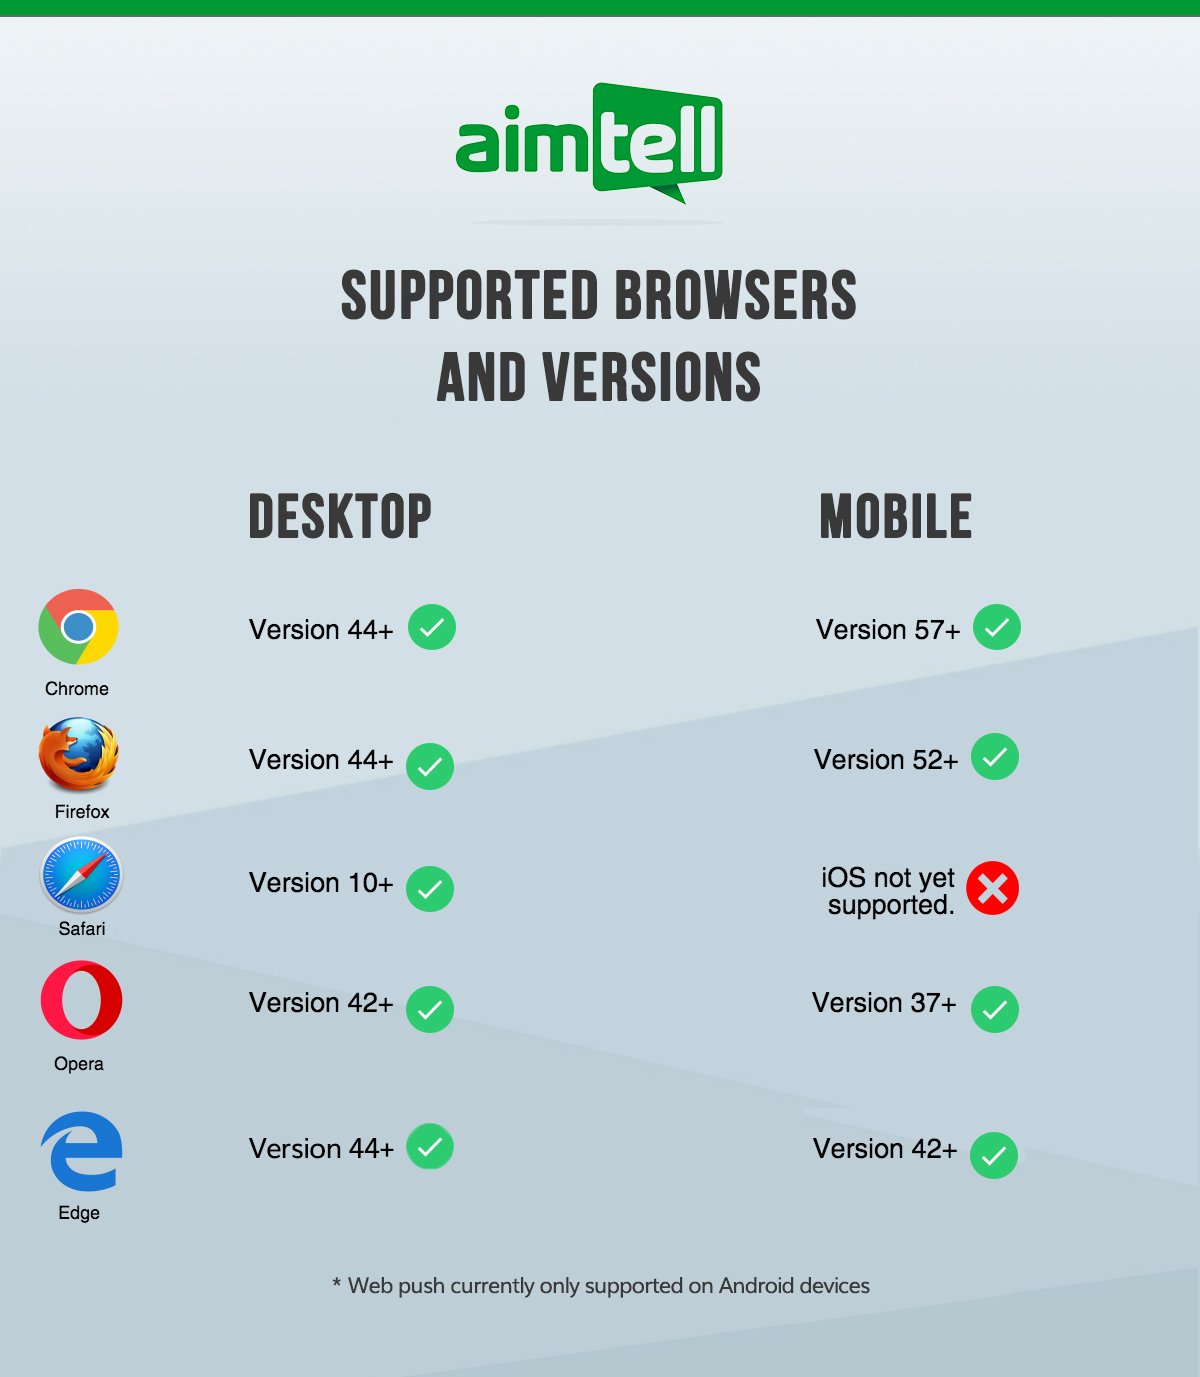 Which platforms/browsers are supported?